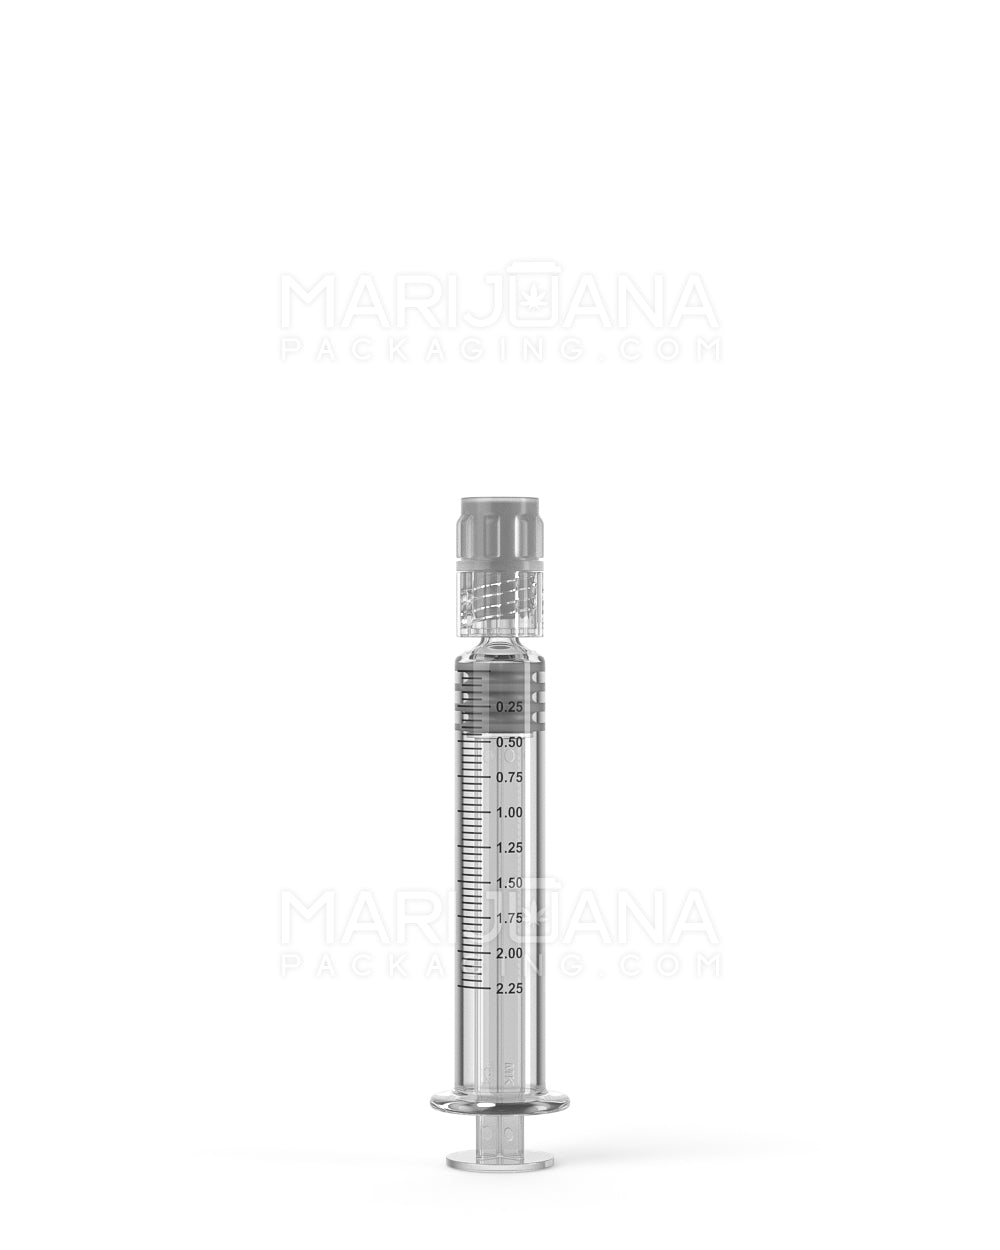 Luer Lock | Glass Dab Applicator Syringes | 2.25mL - 0.25mL Increments - 100 Count - 8